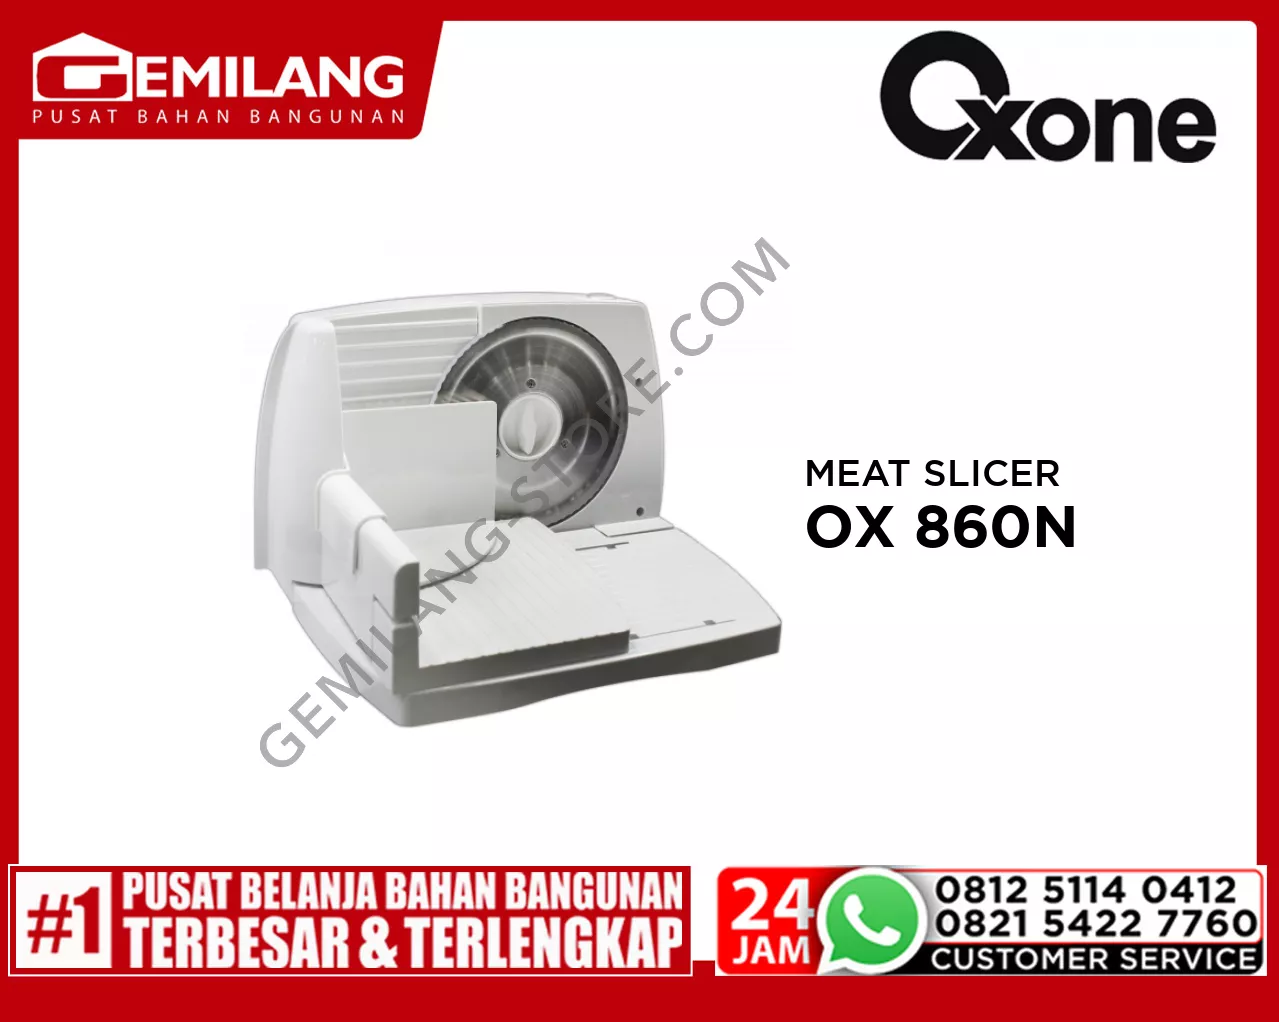 OXONE ELECTRONIC MEAT SLICER OX 860N